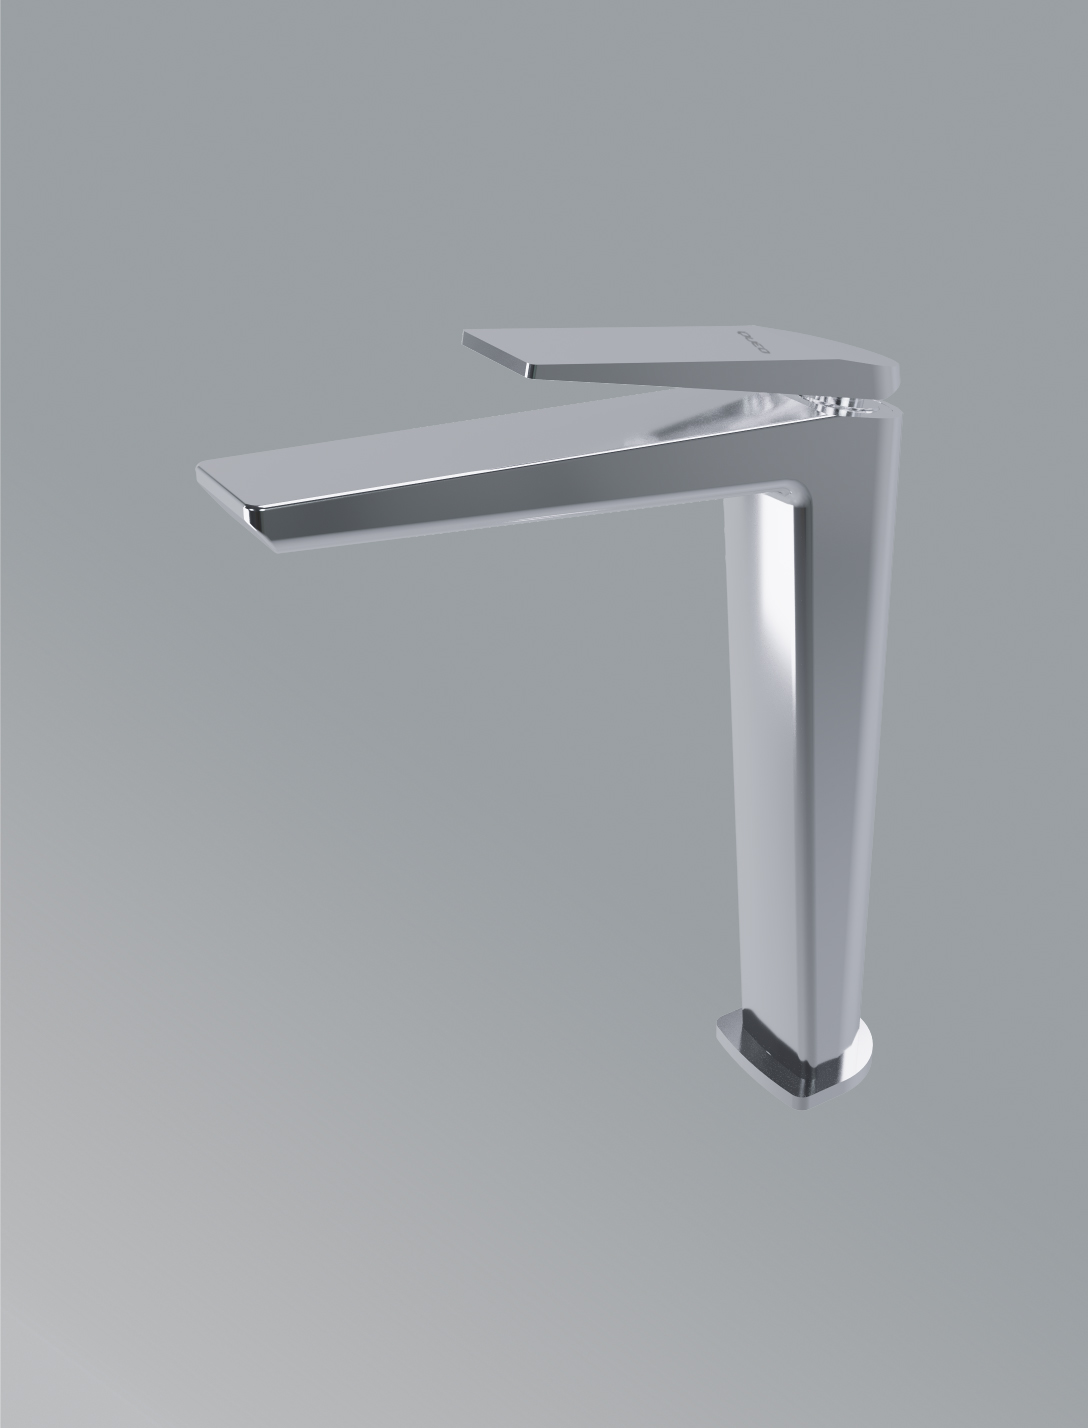   Single Control basin faucet tall in polished chrome